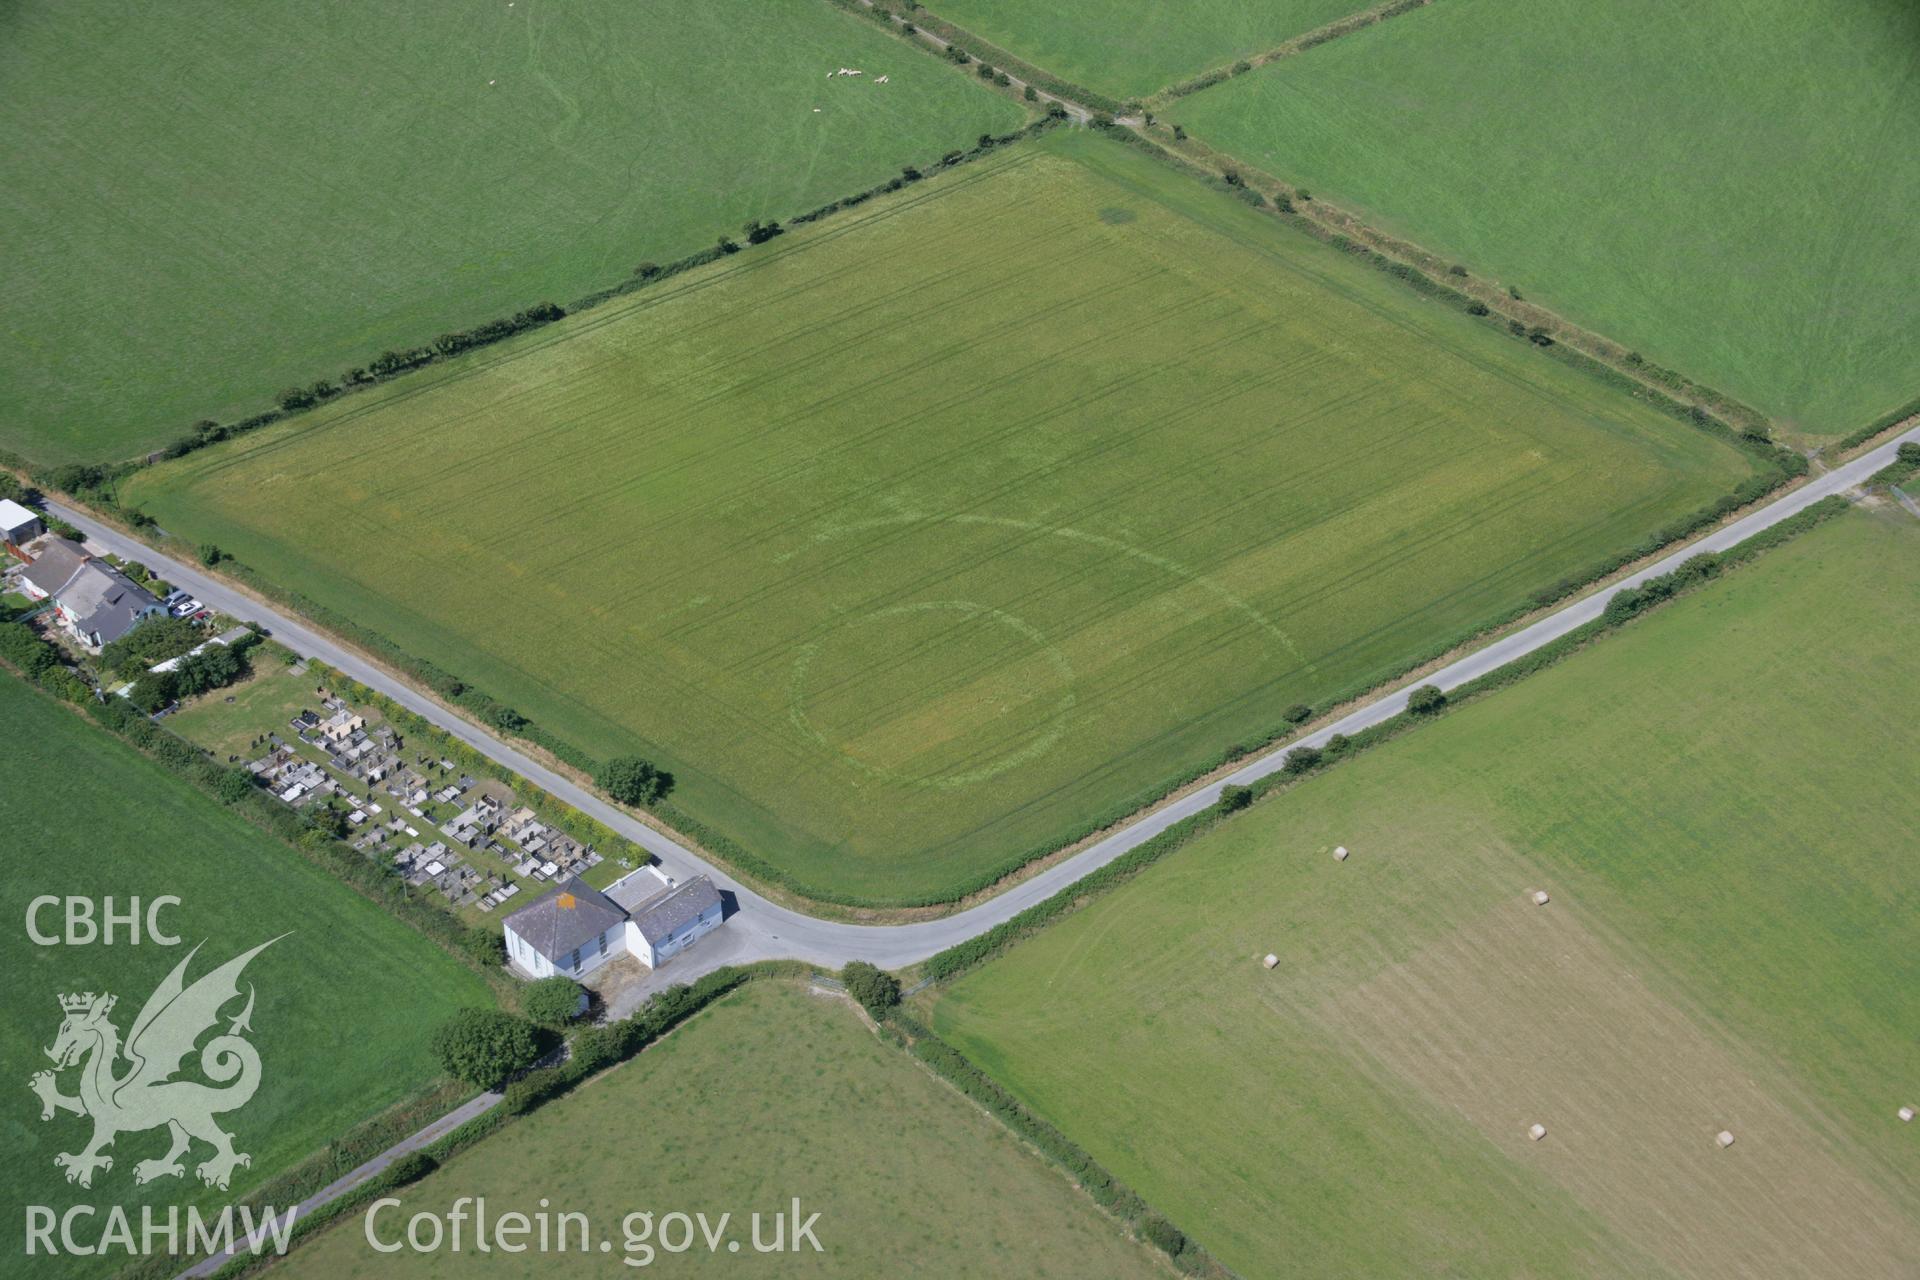 RCAHMW colour oblique aerial photograph of a cropmark enclosure east of Treferedd Uchaf. Taken on 14 July 2006 by Toby Driver.